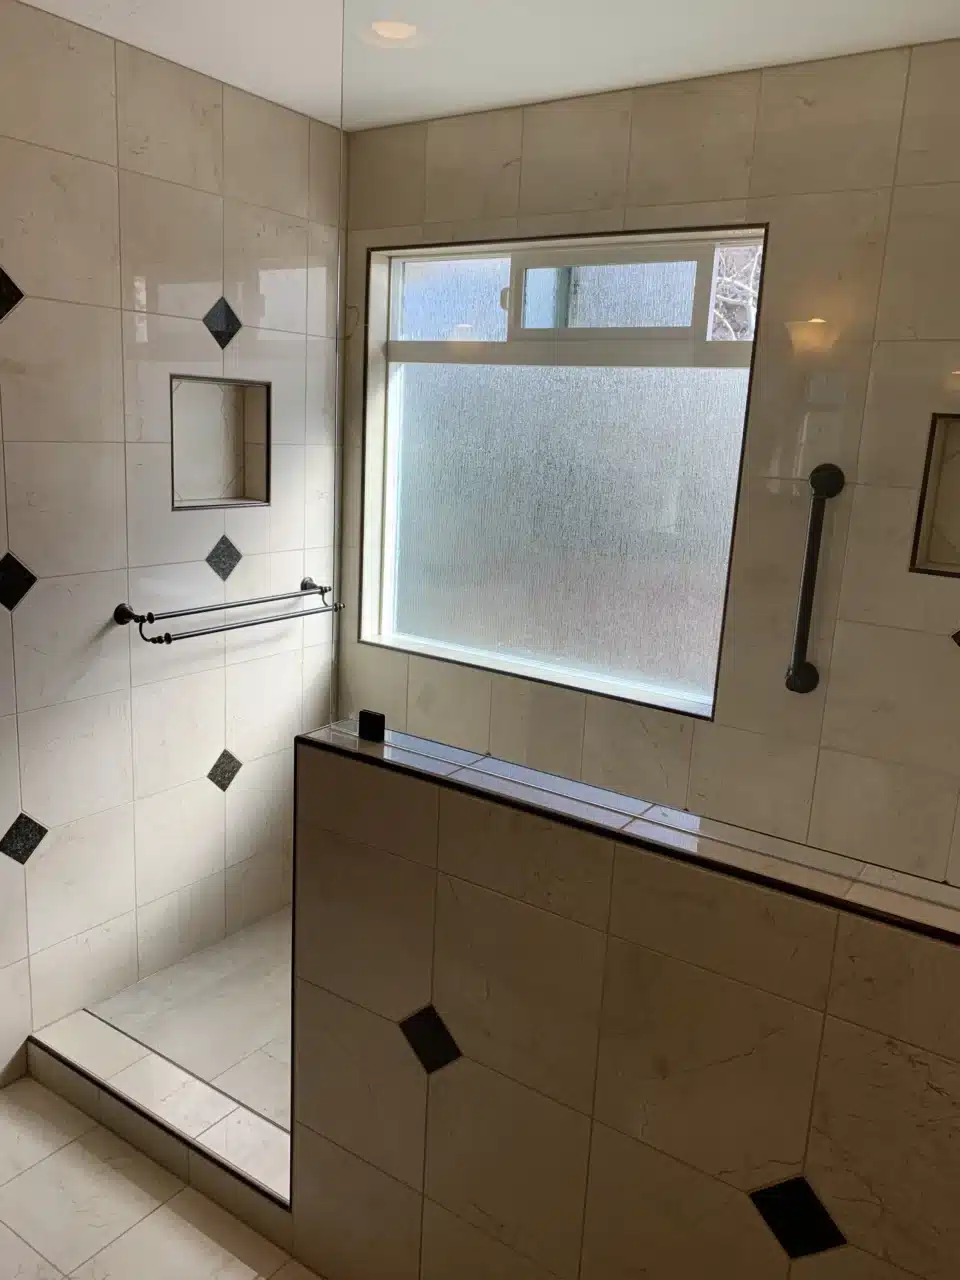 Bathroom Shower with Window Remodel